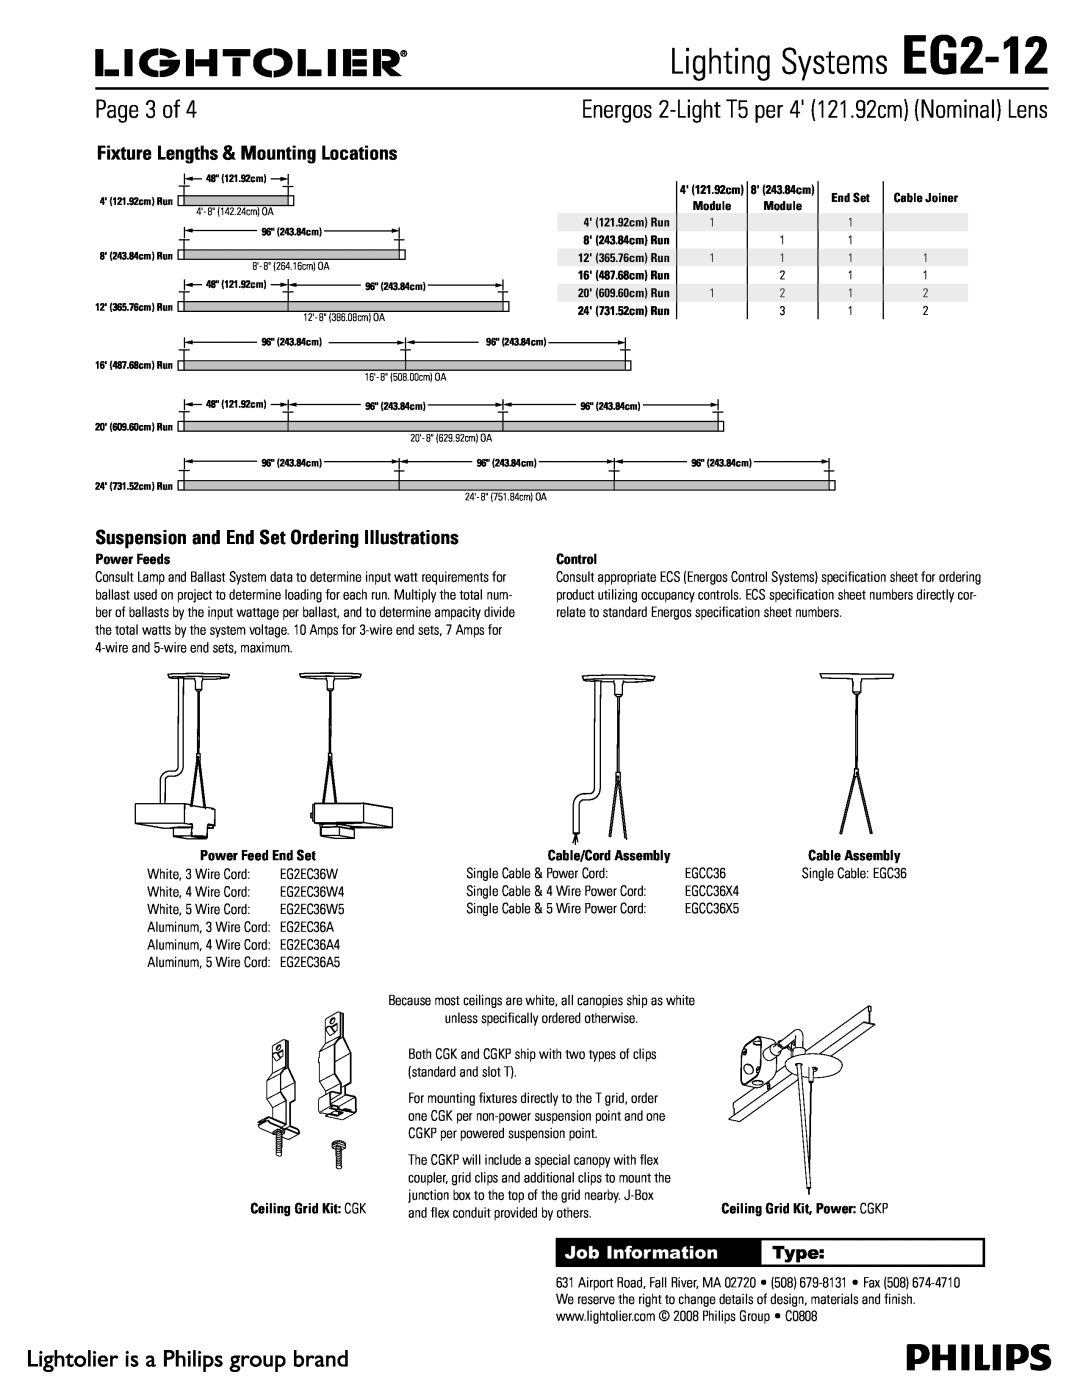 Lightolier Lighting Systems EG2-12, 1BHFPG, Job Information, Type, End Set, Cable Joiner, Cable/Cord Assembly 